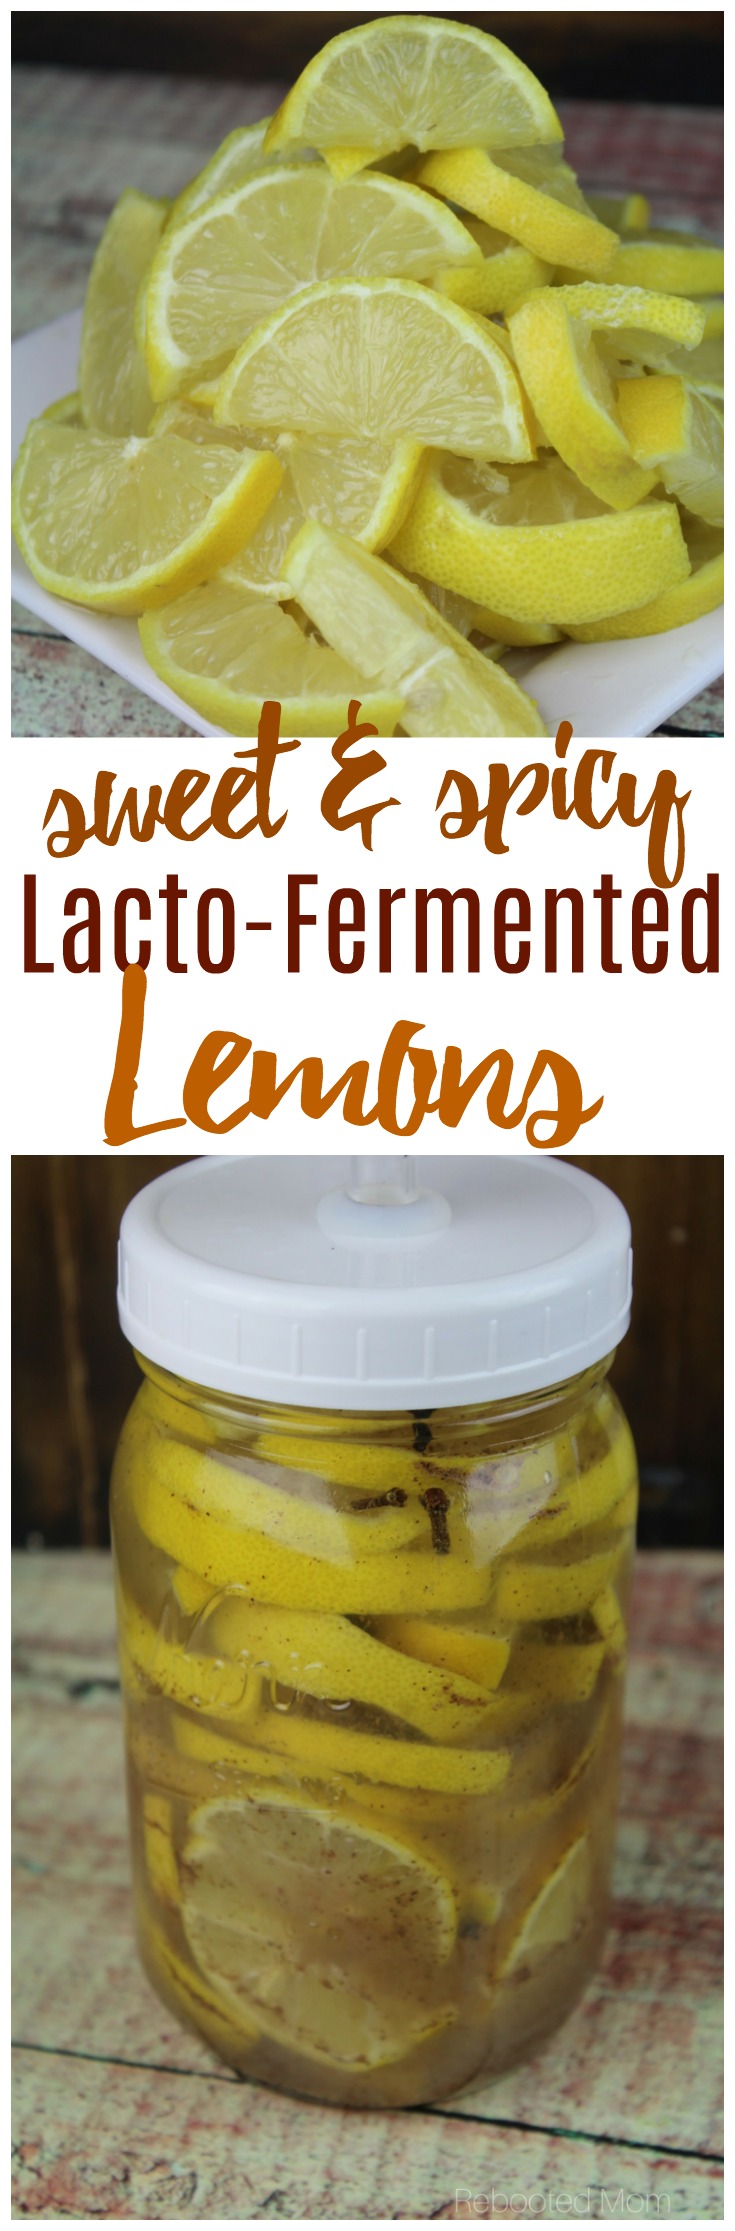  A wonderful way to use an abundance of lemons ~ this lacto-fermented lemon recipe is a little spicy and a little sweet! #lemons #lactoferment #ferment #guthealth